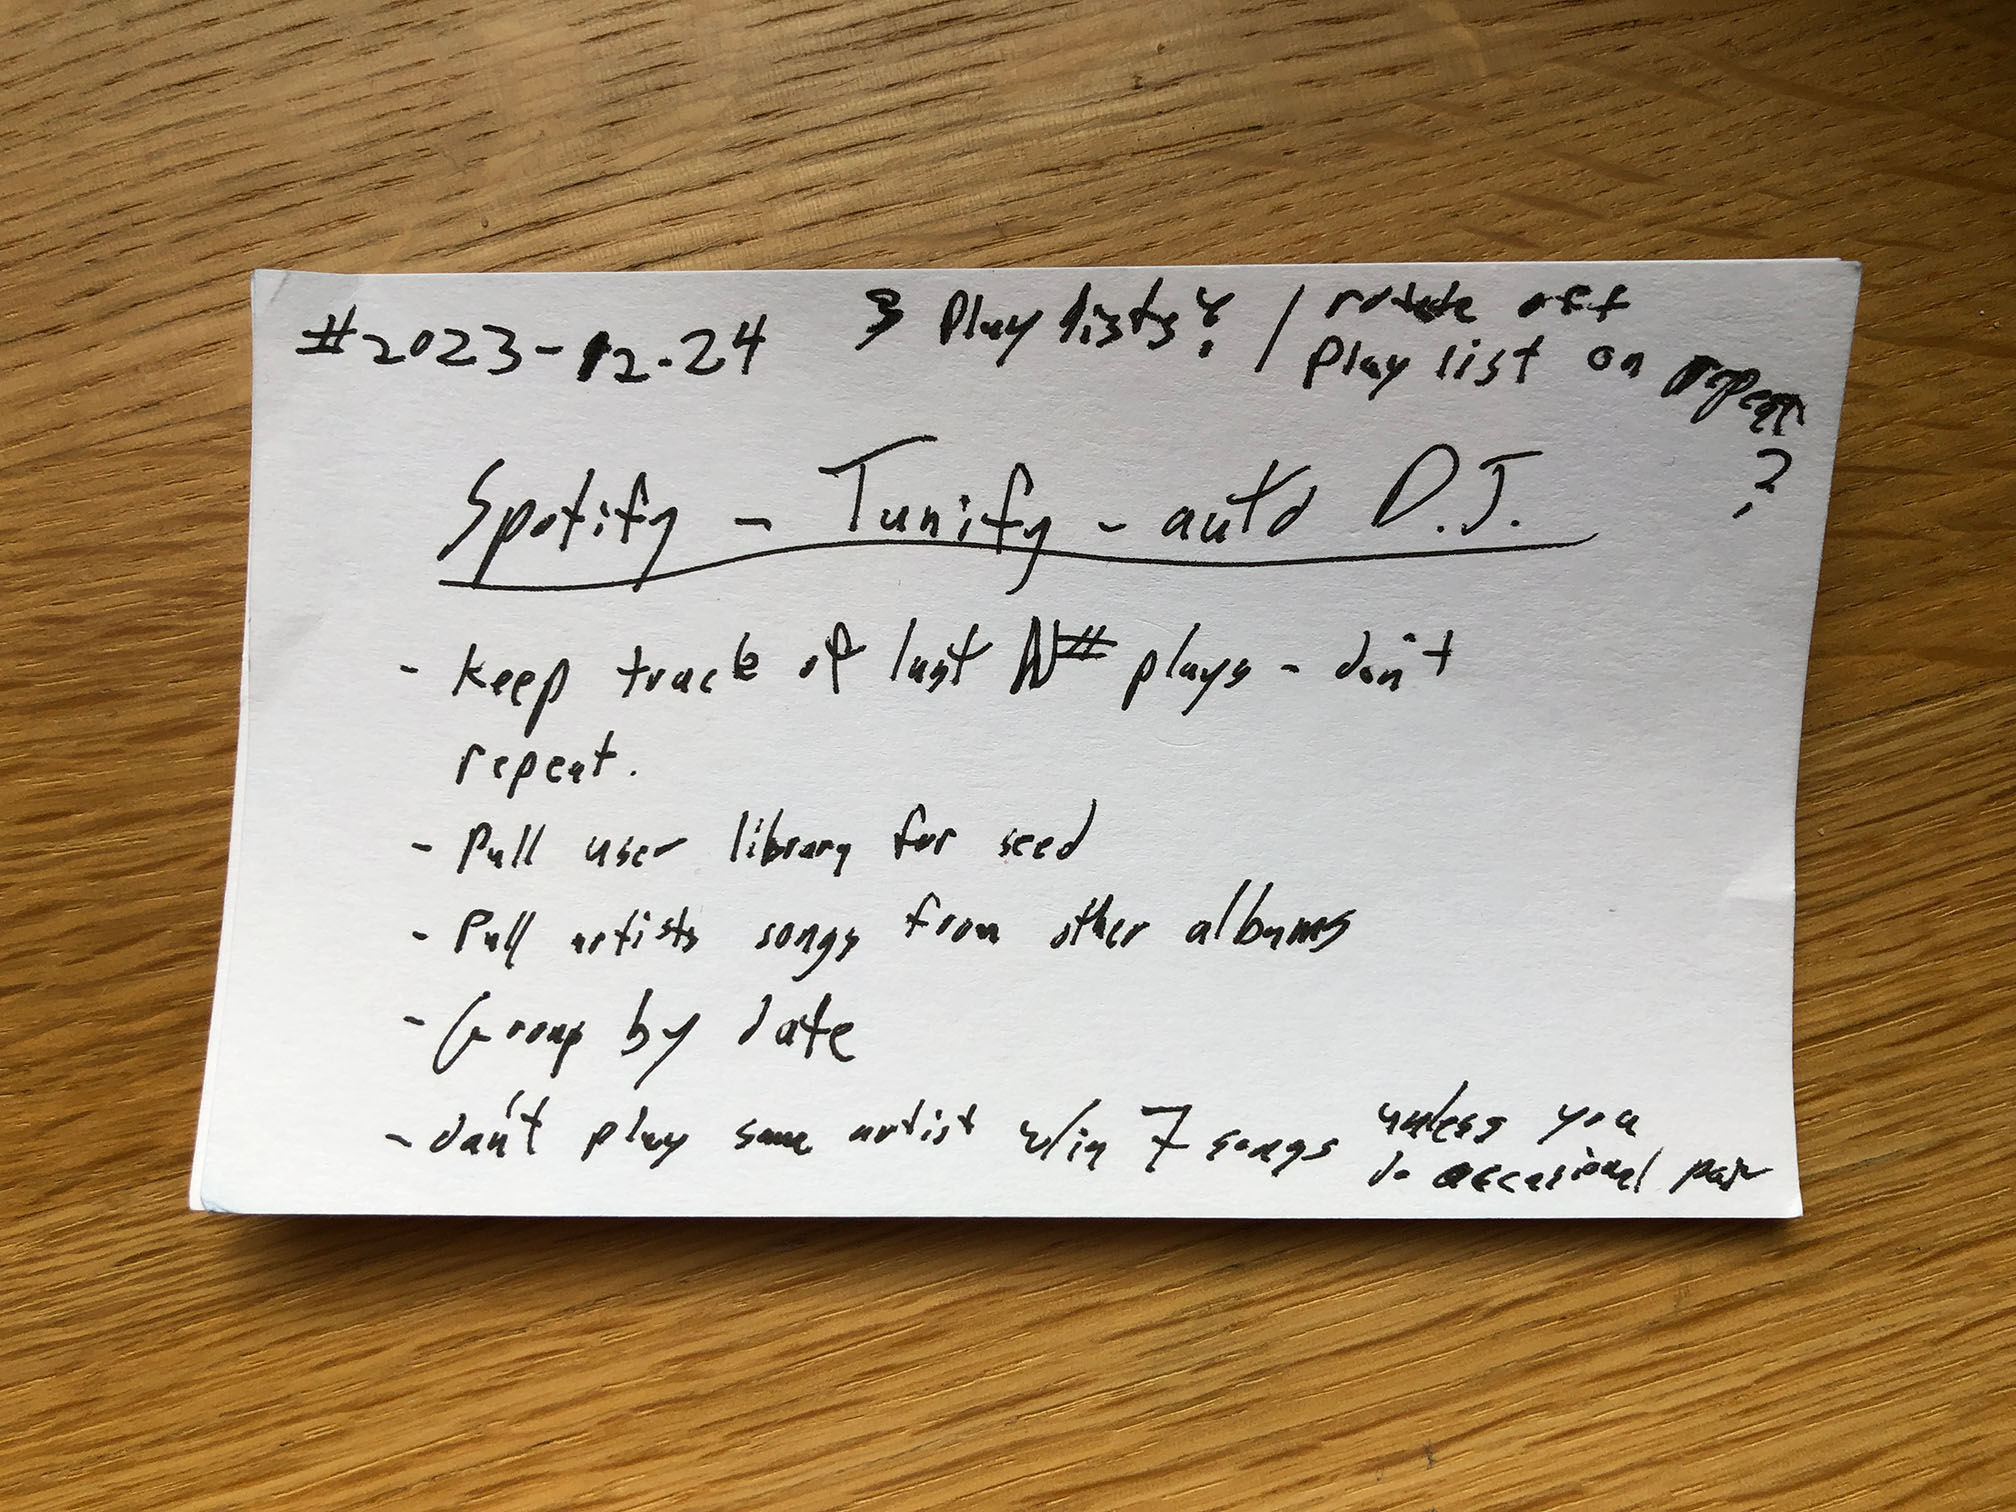 A photo of a 3x5 note card laying on a wood surface. The underlined title of the card is 'Spotify ~ Tunify ~ auto D.J.' Under the title is a list with the following items: 1 keep track of the last N# of plays. don't repeat. 2 pull user library for seed. 3 pull artist songs from other albums. 4 group by date. 5 don't play the same artist within 7 songs unless you do an occasional pair. Above the title is the date 2023 ~ 12 ~ 24 and 3 playlists? and roll off playlist on repeat?